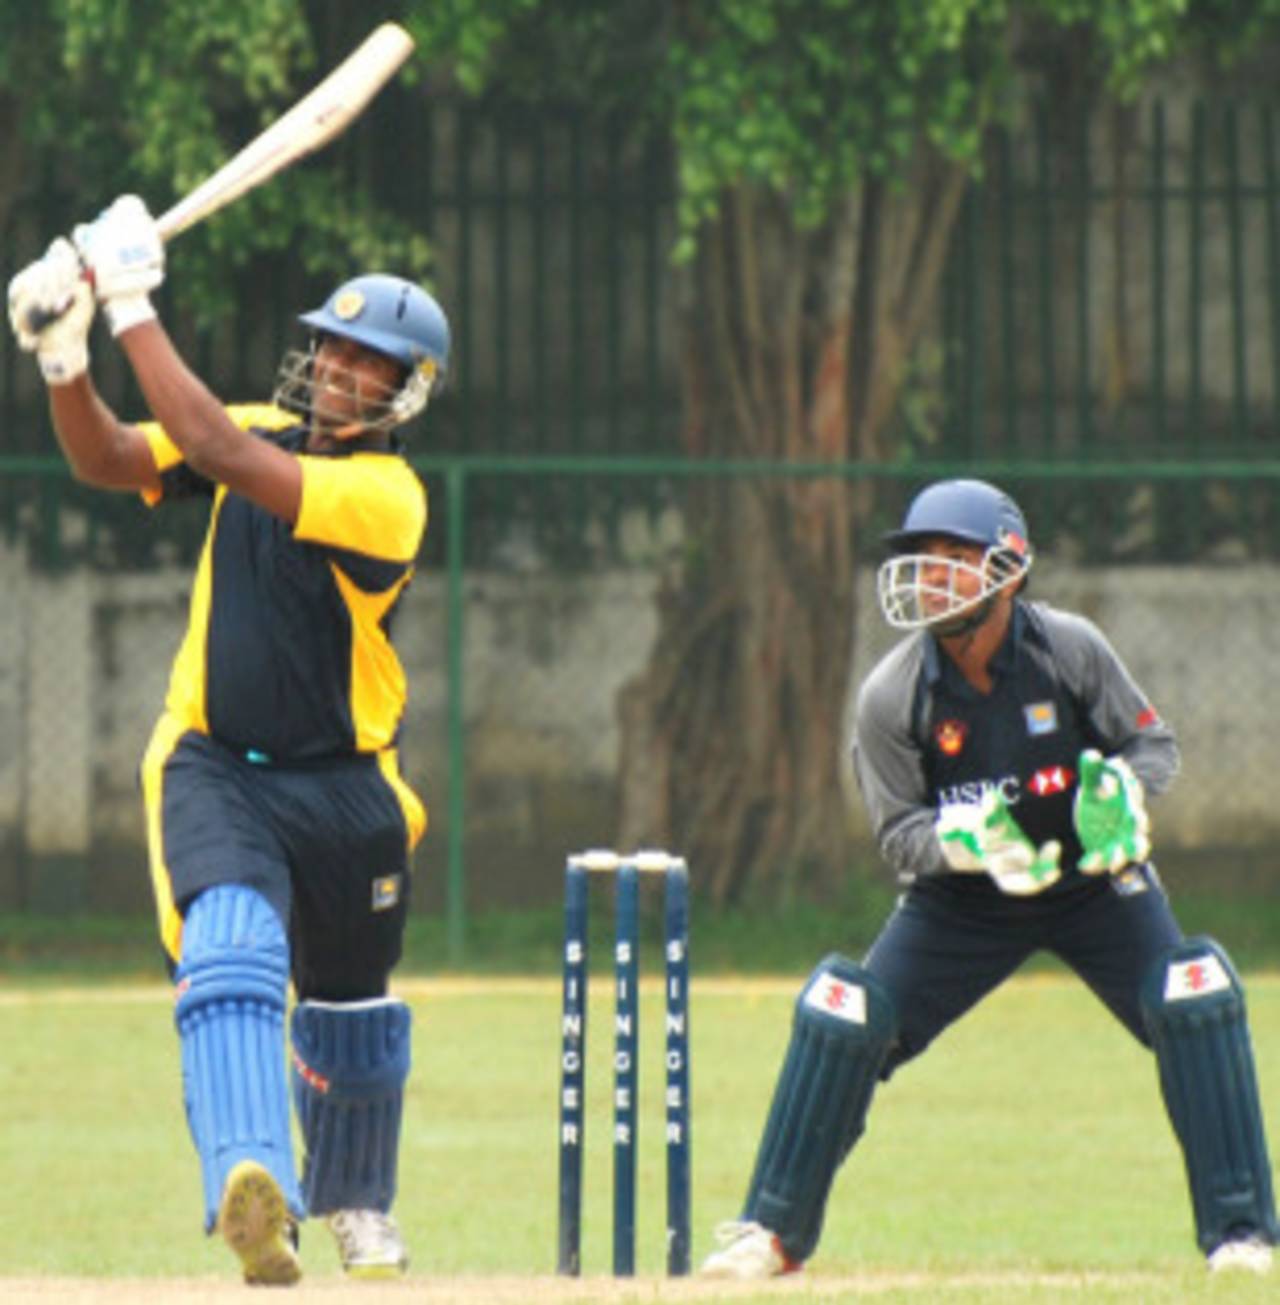 Thisara Perera scored 112 runs and took ten wickets in the preliminary matches to help Colts get through to the semi-finals of the Premier Limited Over Tournament&nbsp;&nbsp;&bull;&nbsp;&nbsp;Manoj Ridimahaliyadda